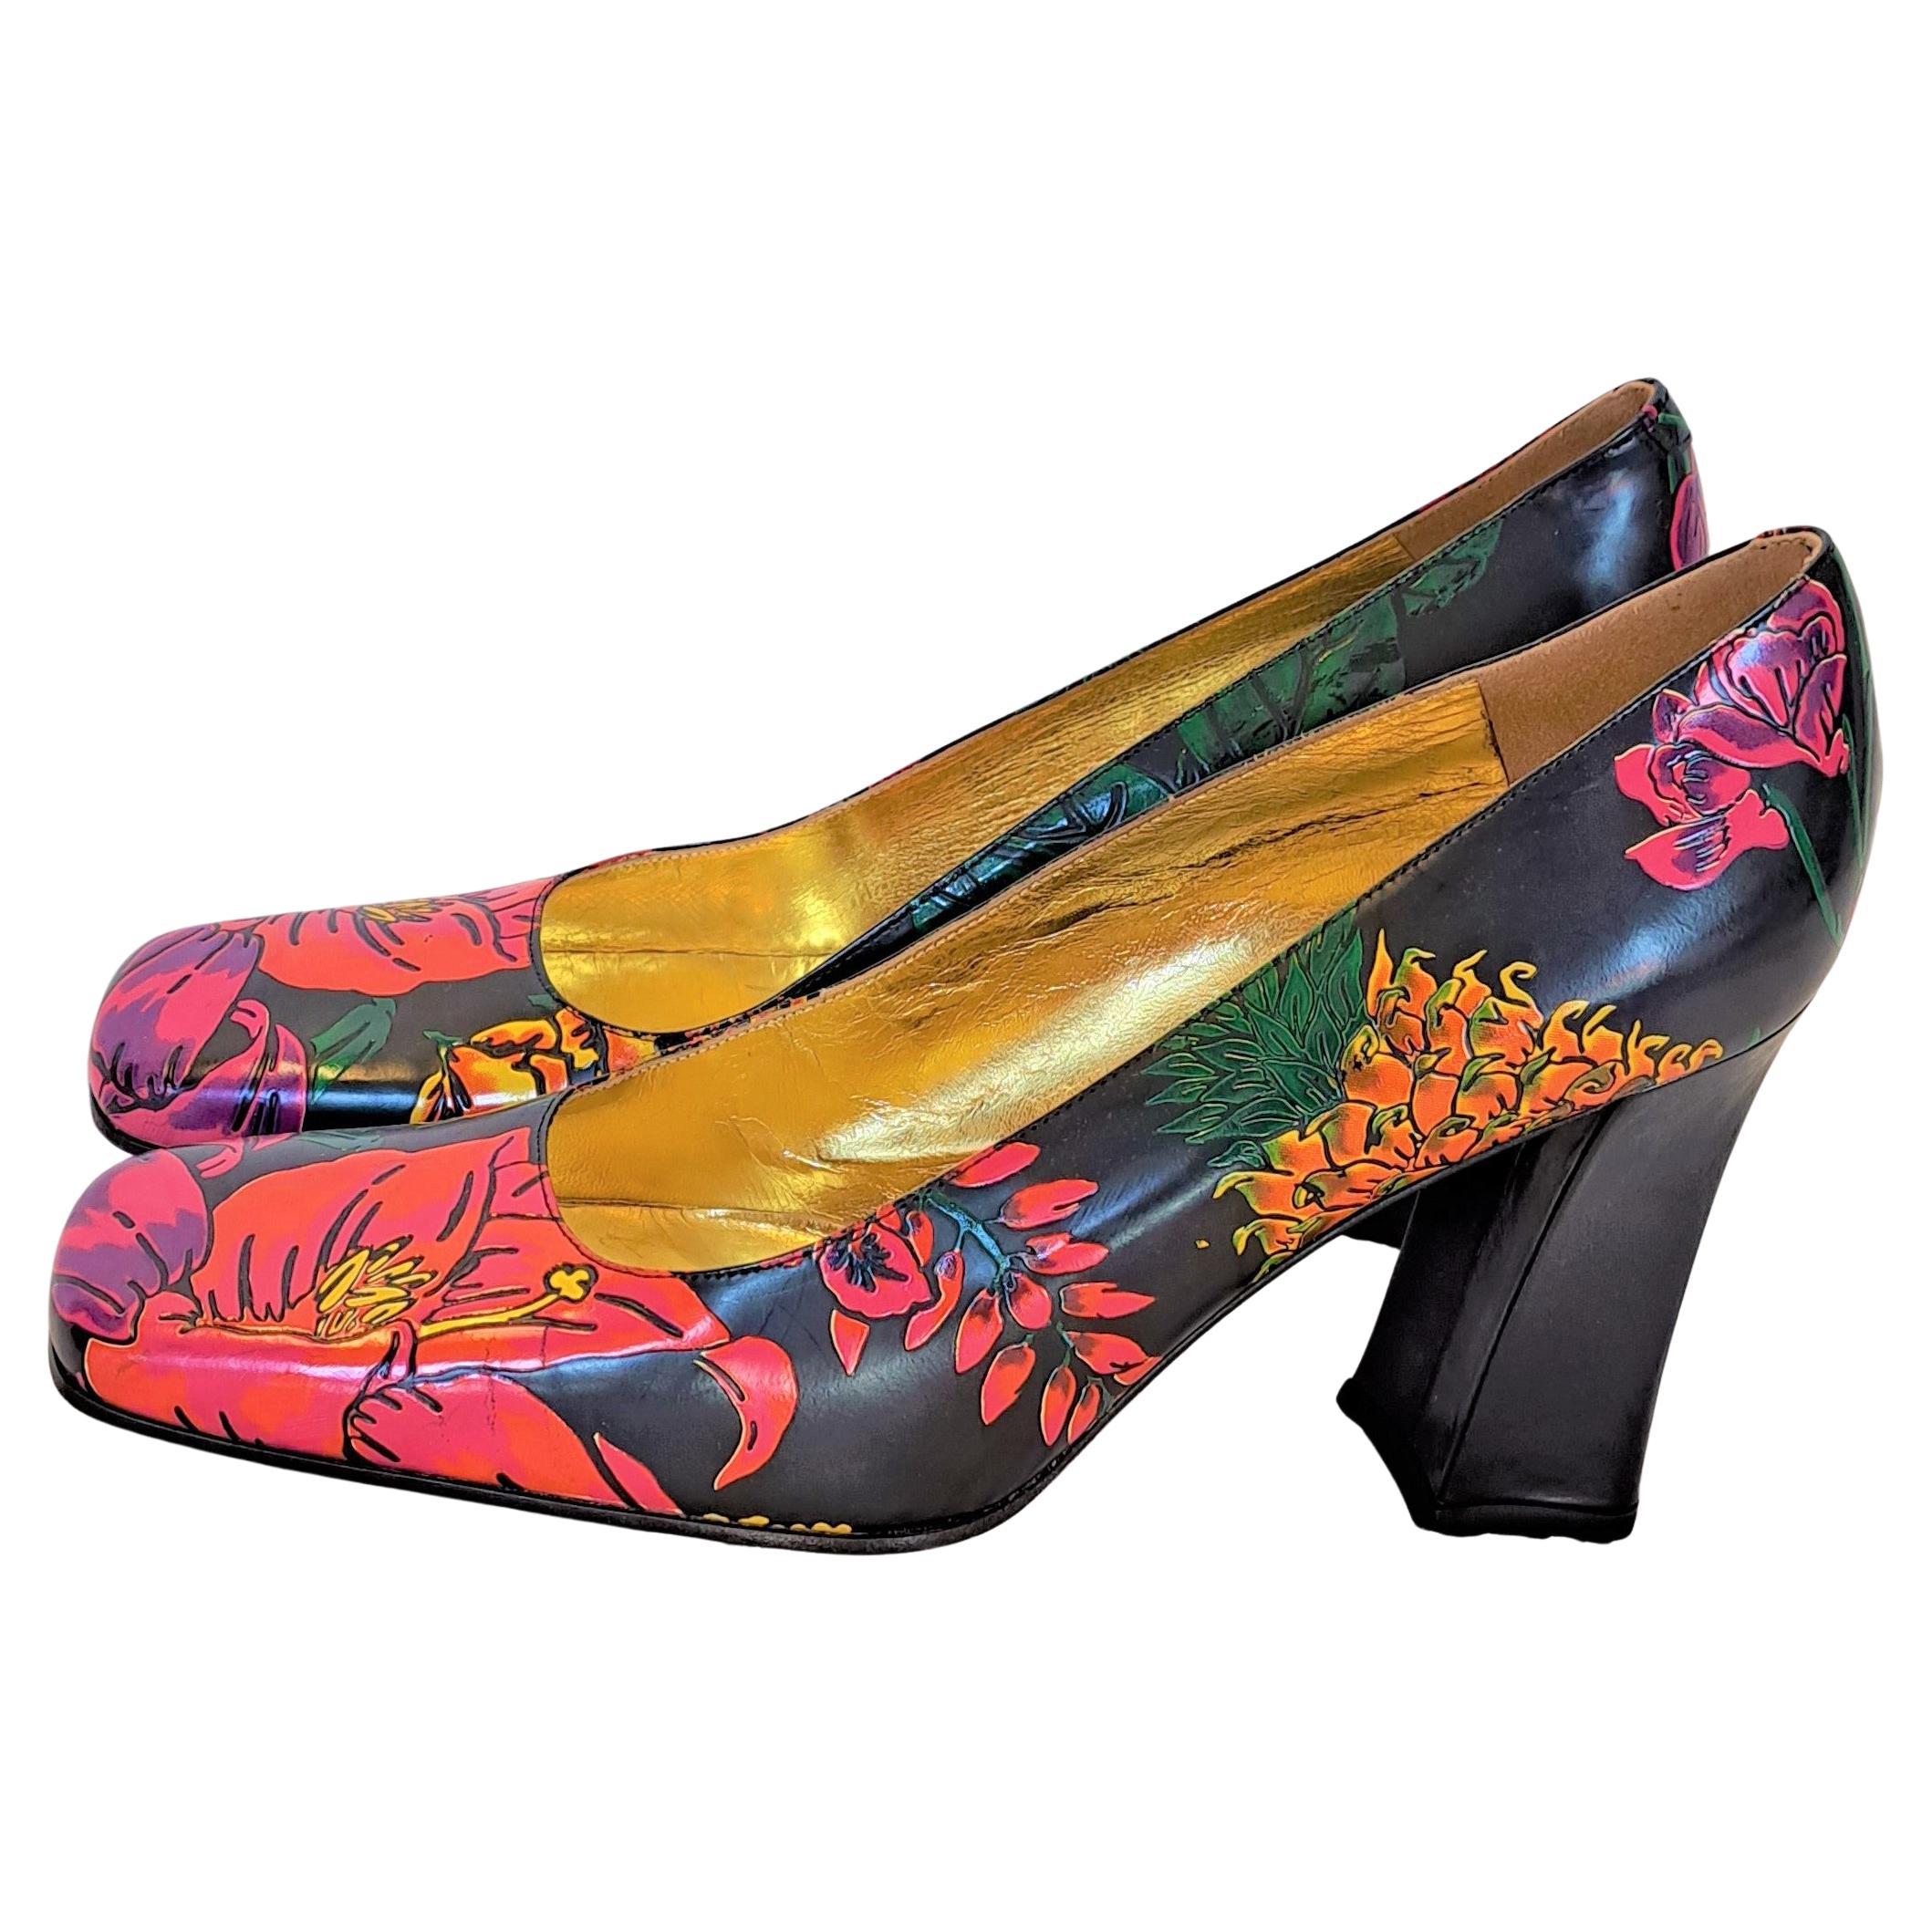 Exceptional one-of-a kind matching set for the fashionlover. Price is for the whole matching set.

Pre-loved woman Gianmarco Lorenzi 1996 leather pumps  size (italian) 40 with printed colored flowers.
These beautiful rare pumps are in very good